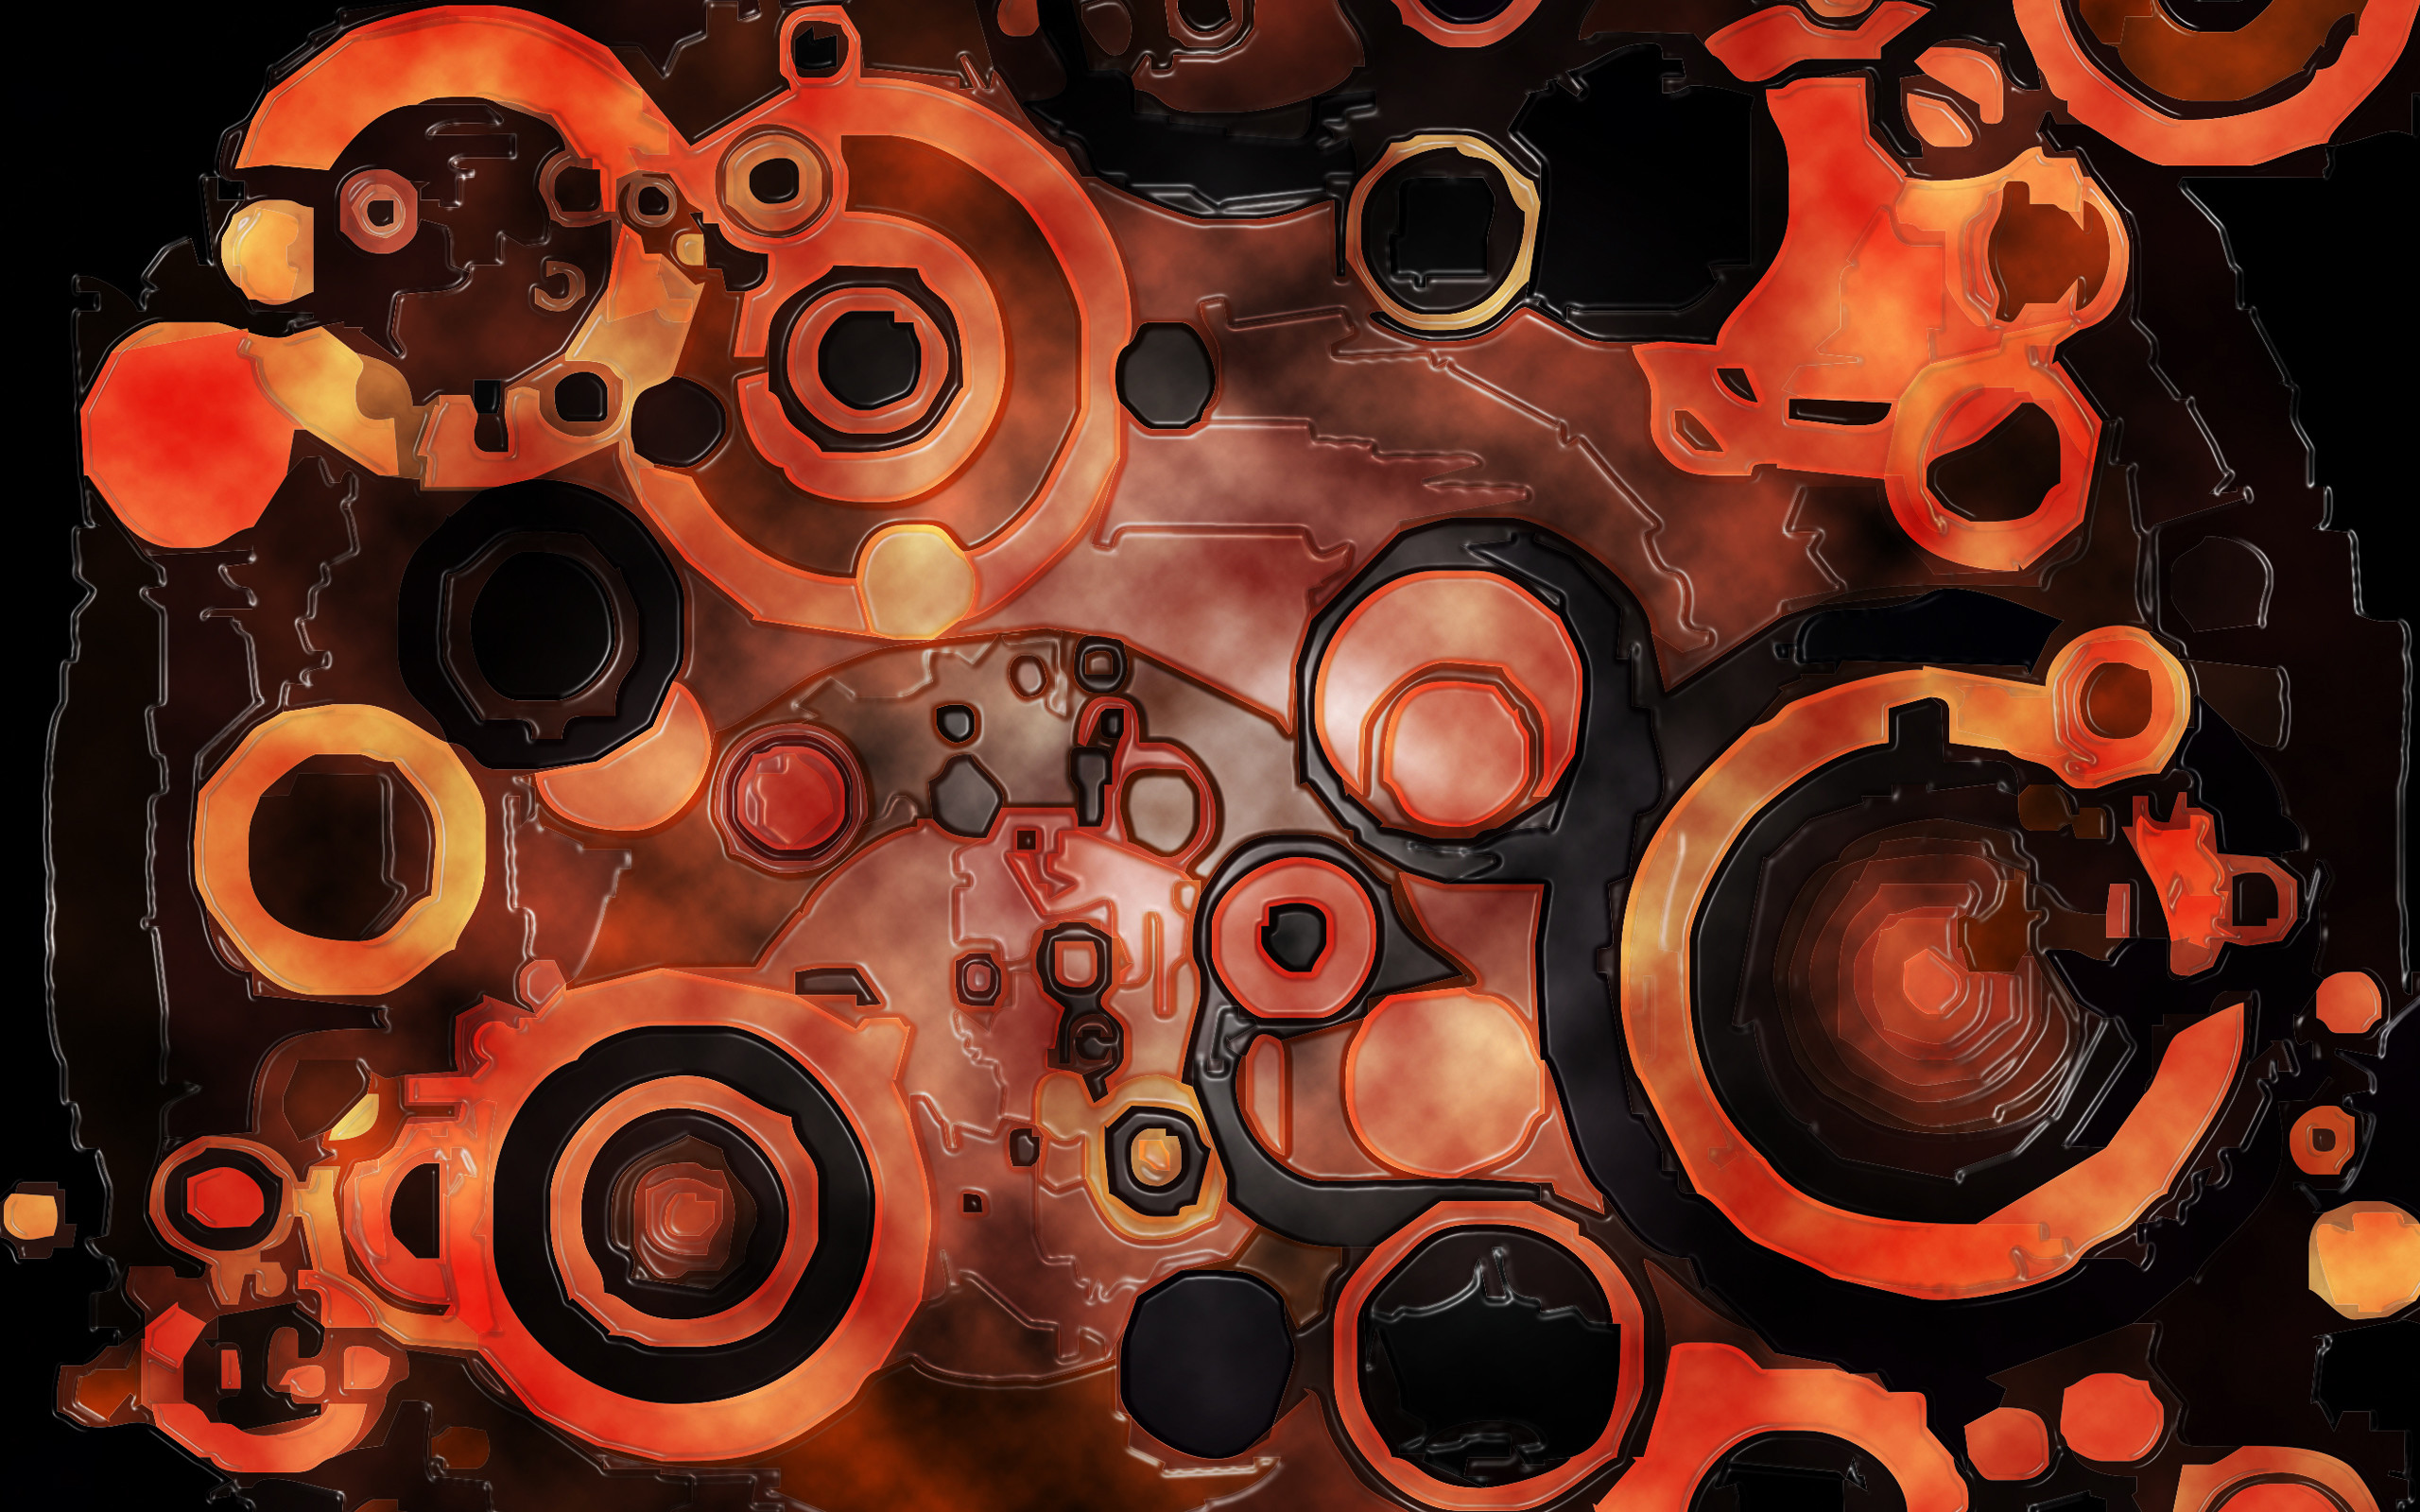 2560x1600 Abstract 3D Artistic Wallpaper in Orange and Black